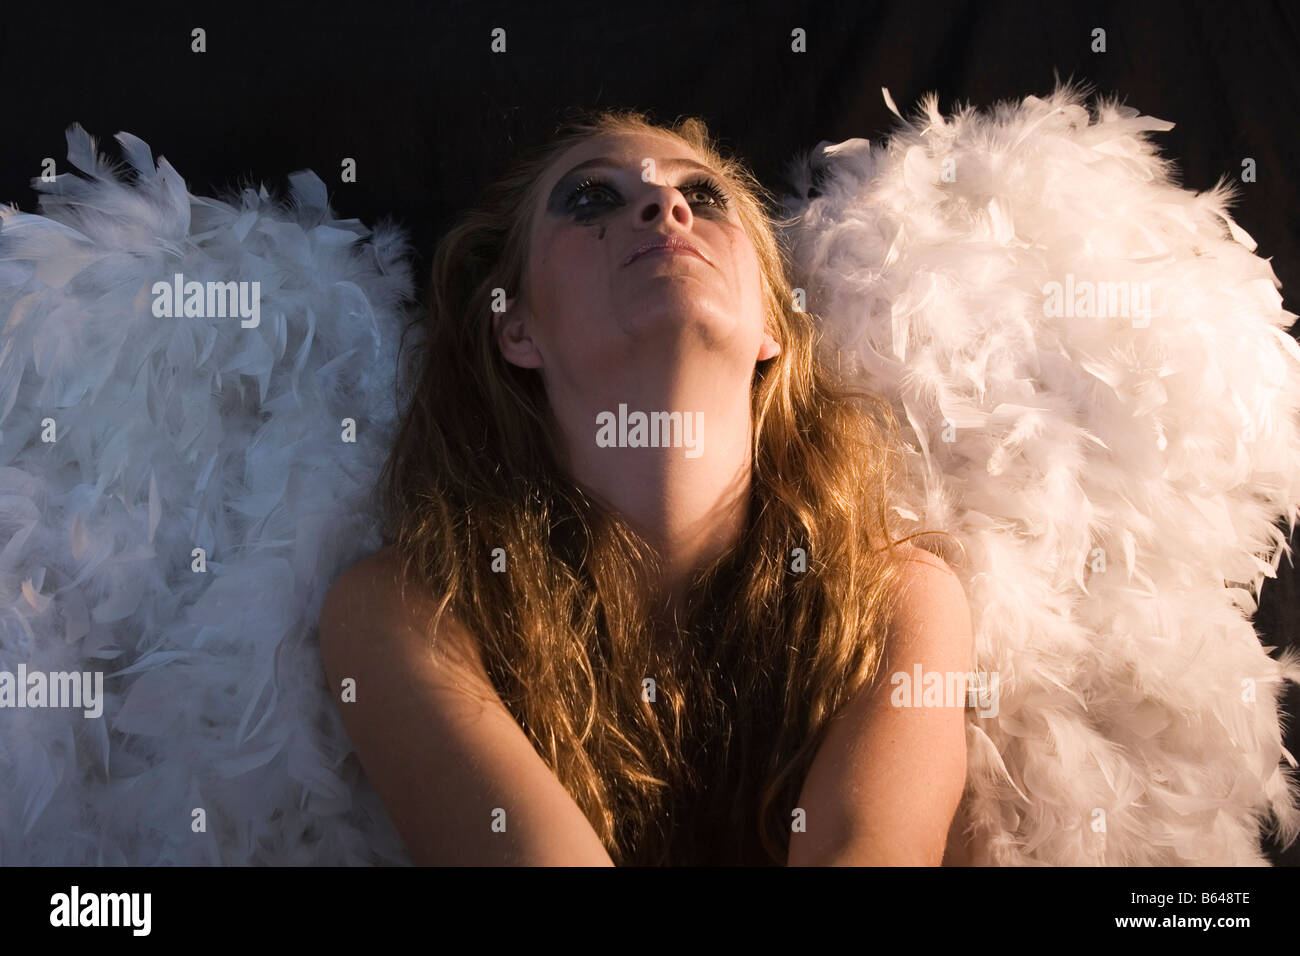 Young woman with ruined black eye make up wearing white angel wings Stock Photo